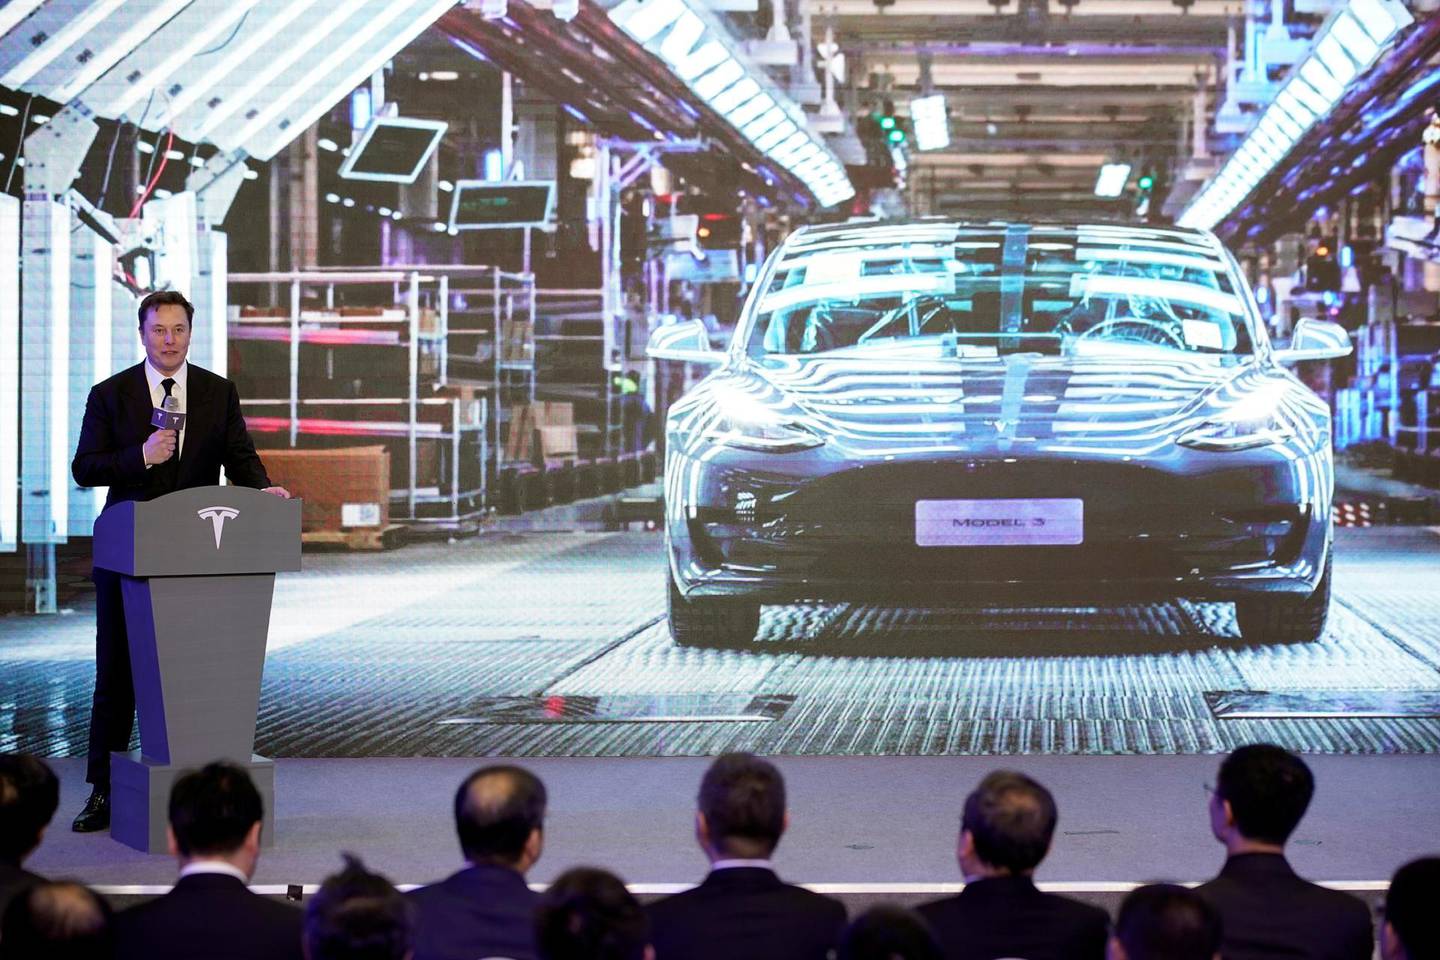 Tesla Inc CEO Elon Musk speaks next to a screen showing an image of Tesla Model 3 car during an opening ceremony for Tesla China-made Model Y program in Shanghai, China January 7, 2020. REUTERS/Aly Song